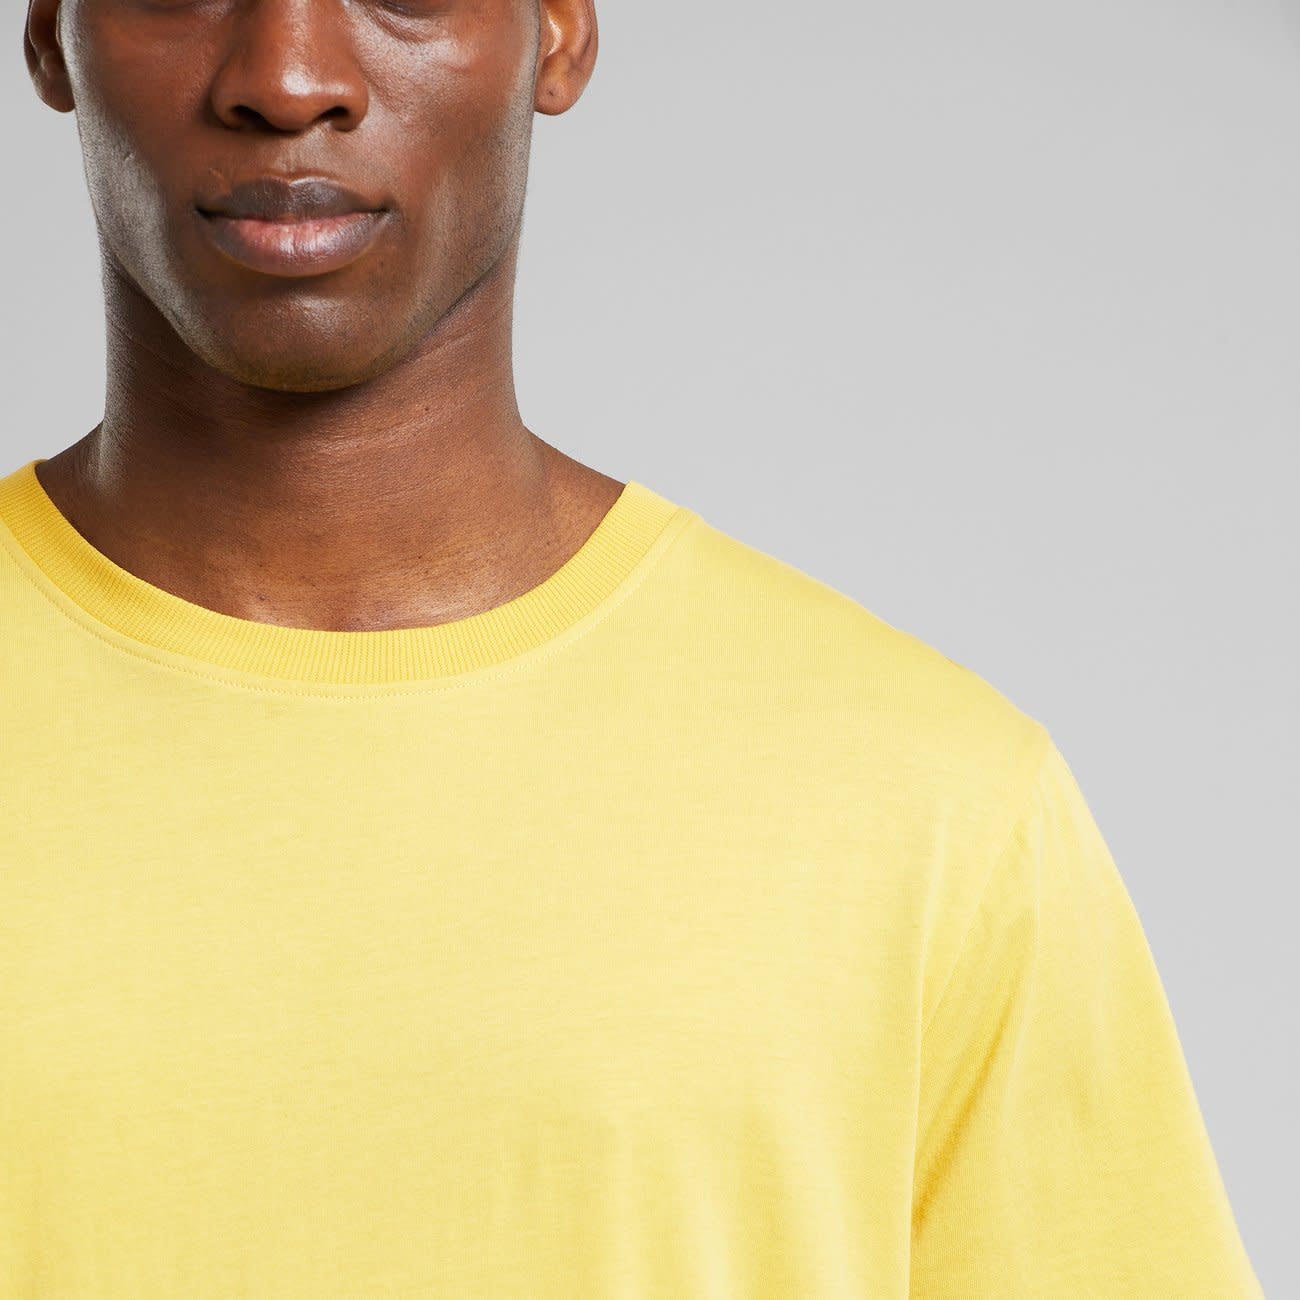 Dedicated Dedicated, Stockholm Base, misted yellow, XL